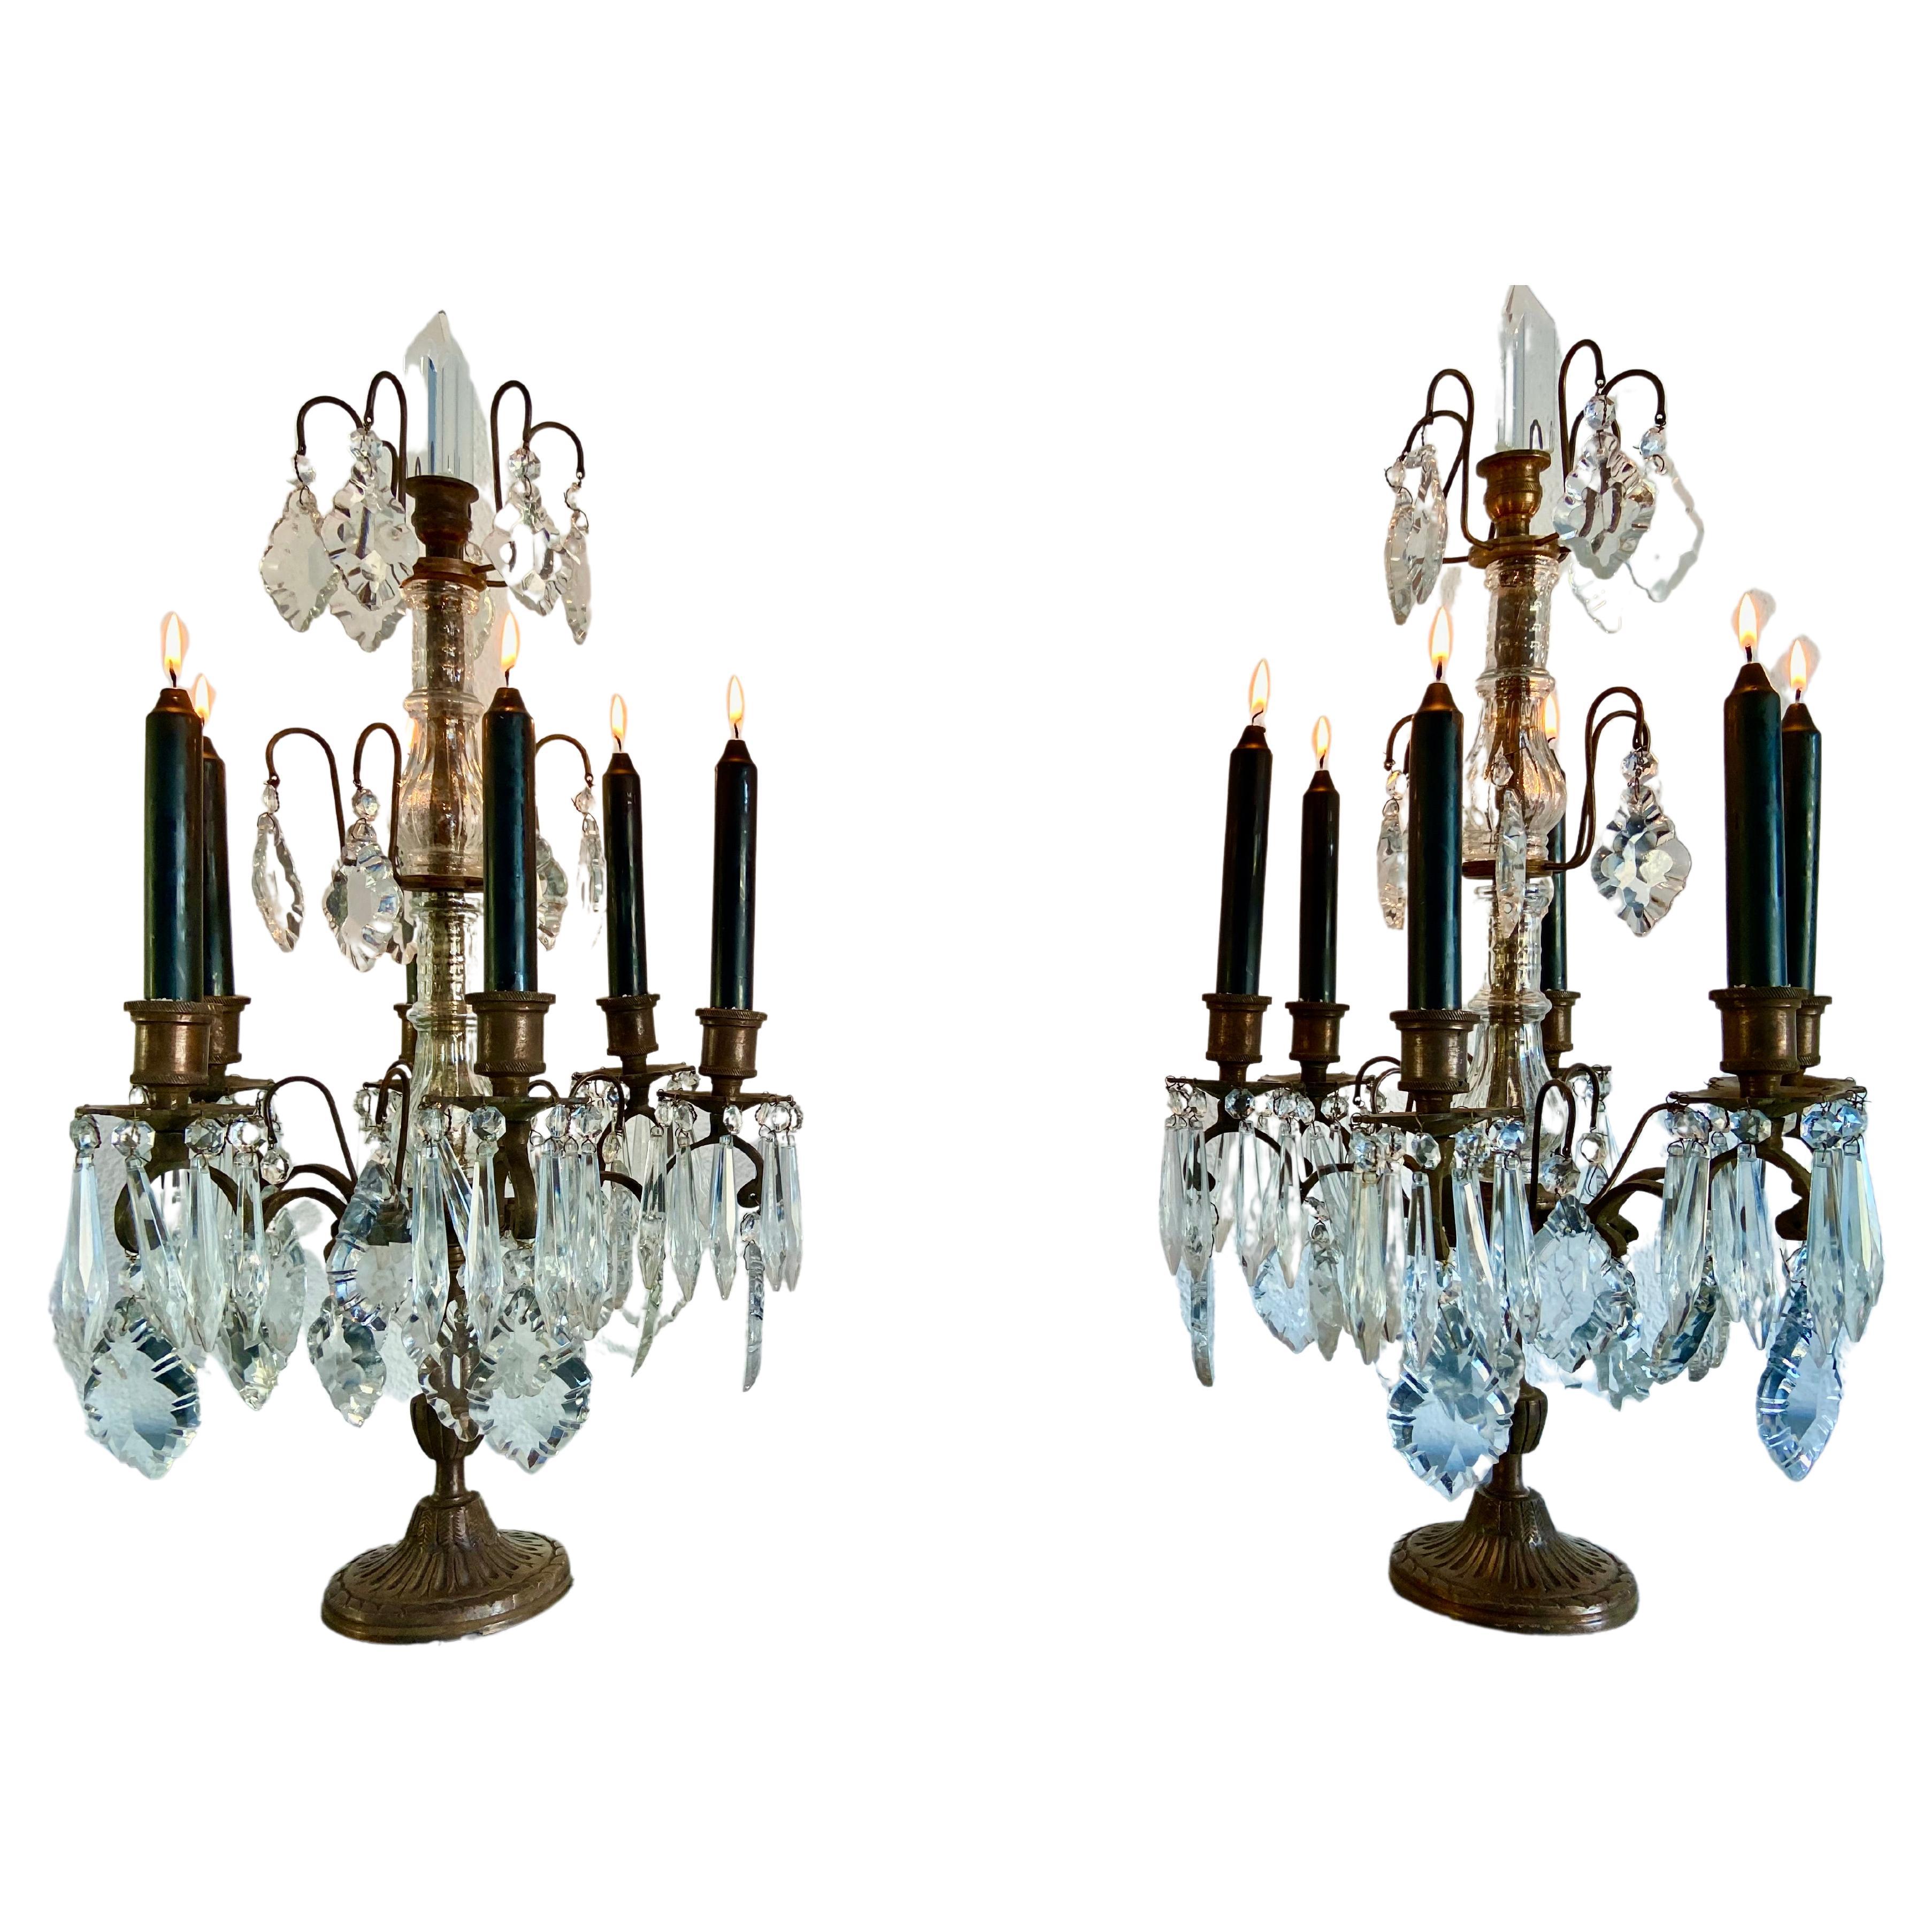 Pair of girandoles in bronze with crystal pendants, French, circa 1880.